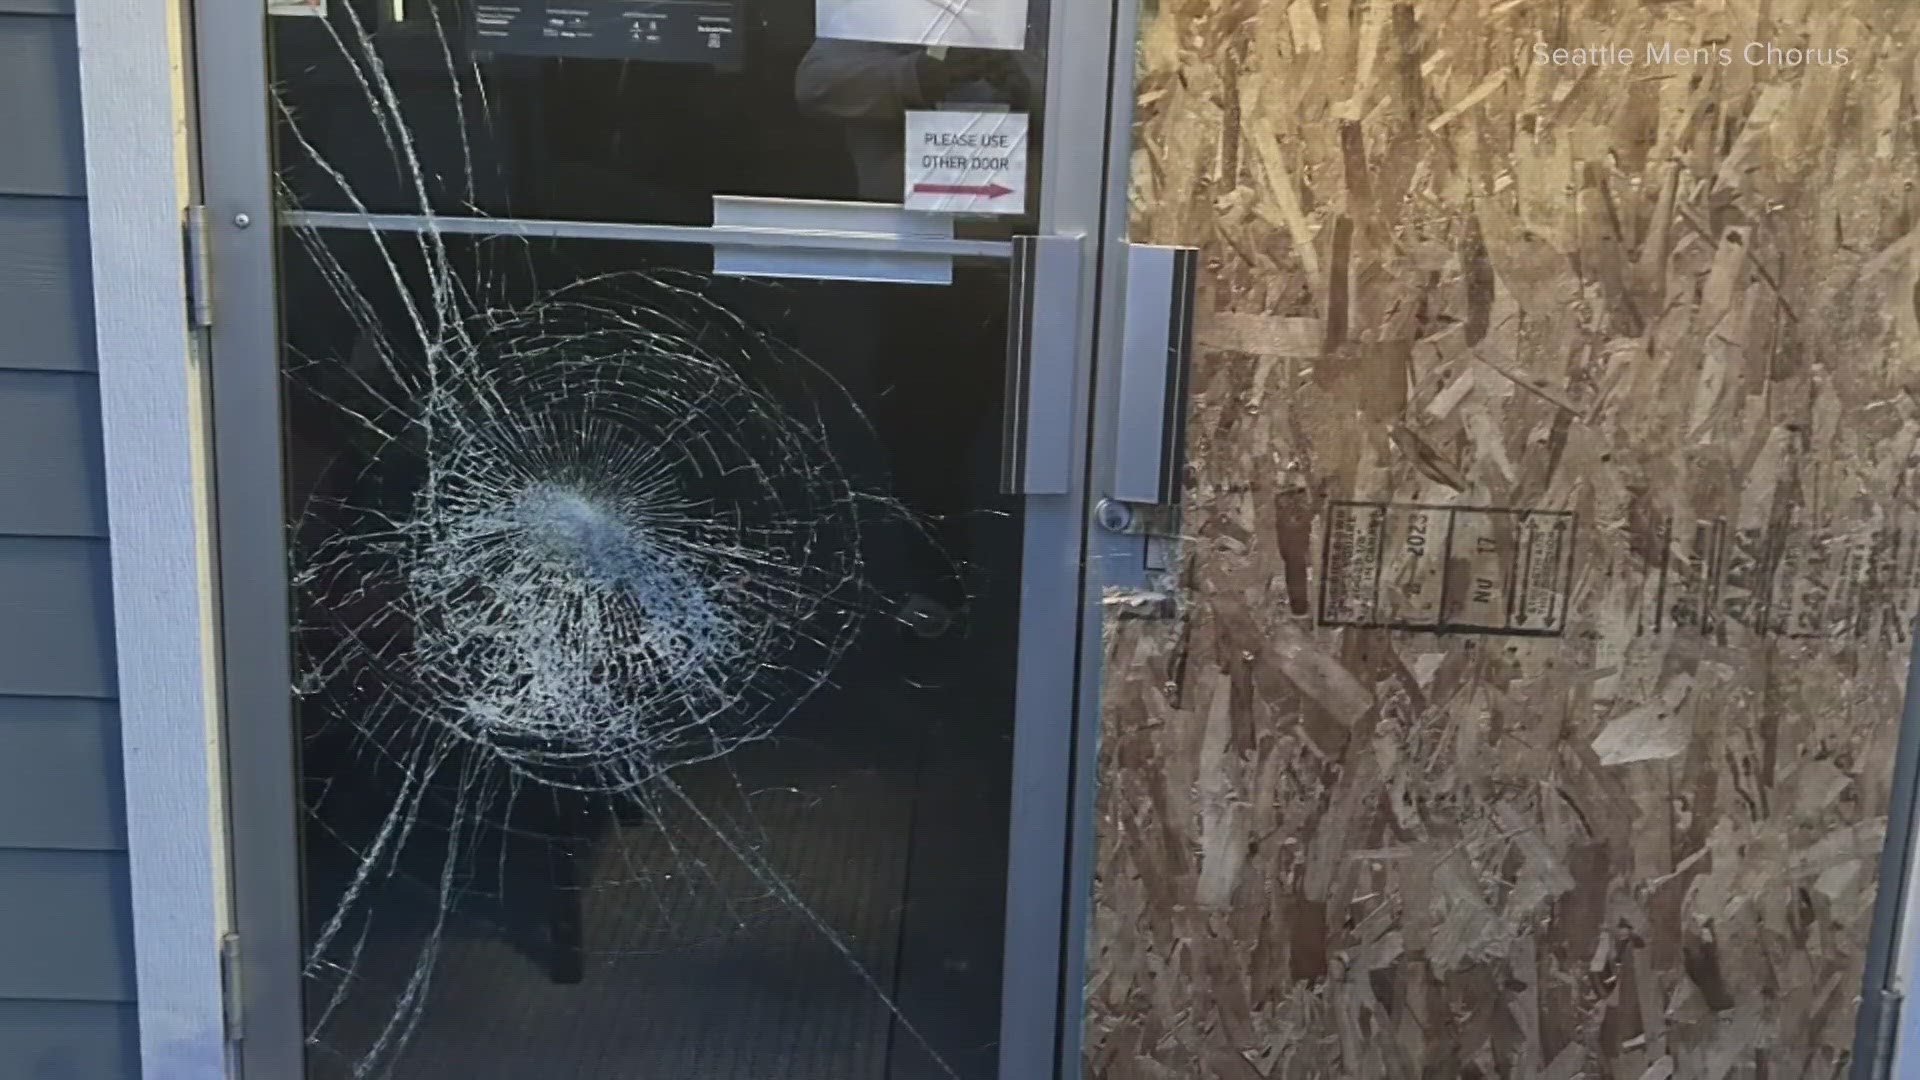 The repeated break-ins have amounted to $10,000 in damages.